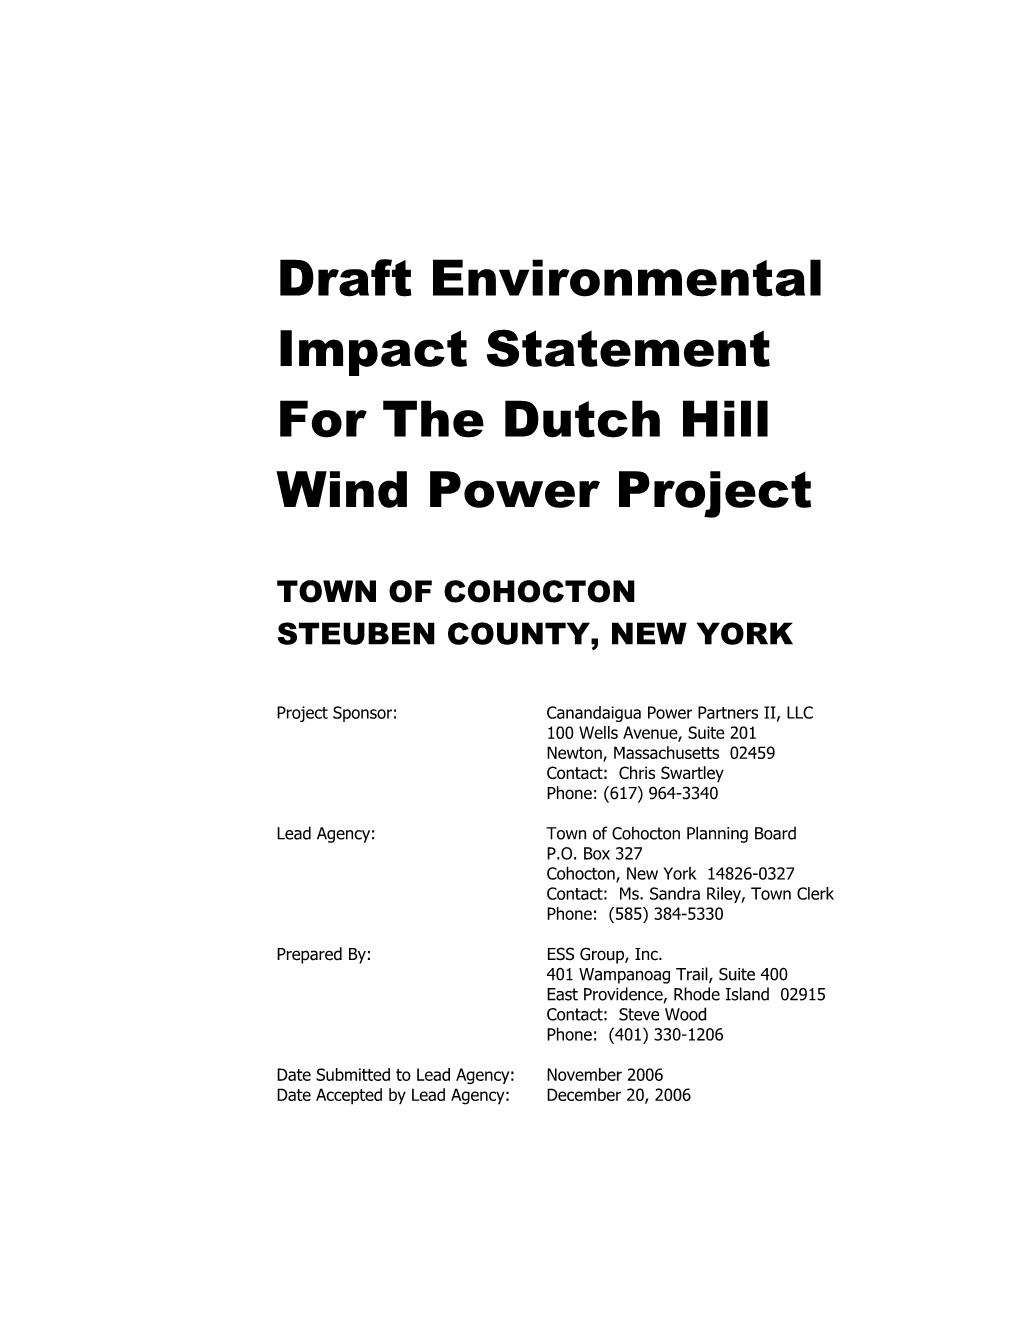 Draft Environmental Impact Statement for the Dutch Hill Wind Power Project